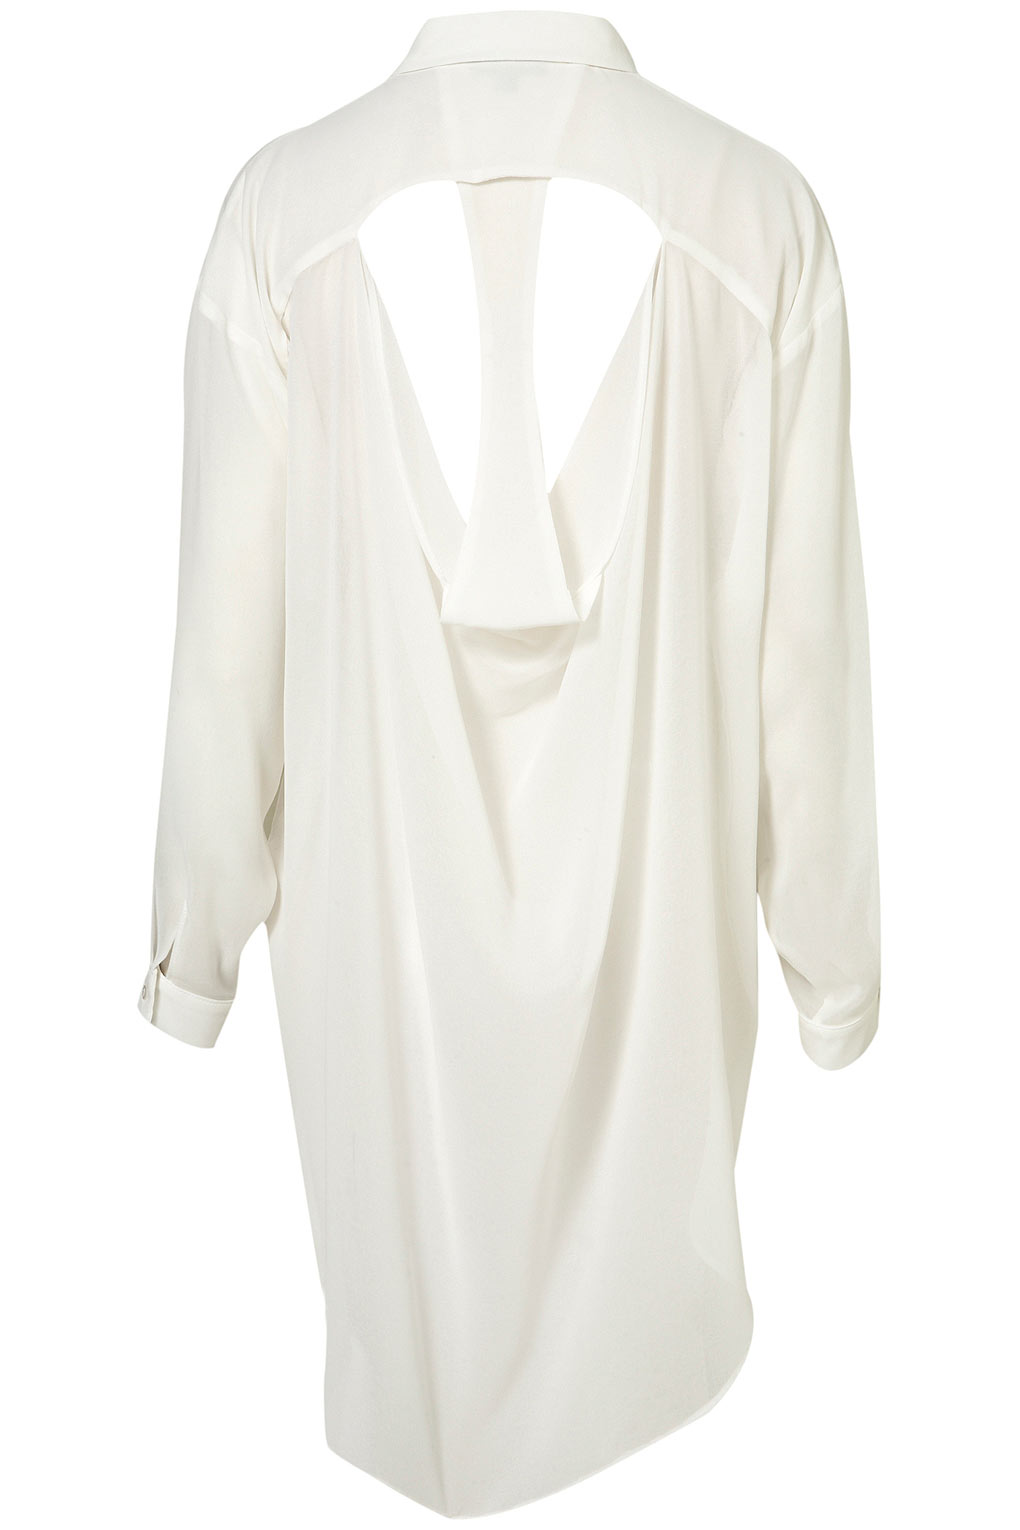 Lyst - Topshop Racer Back Shirt in White